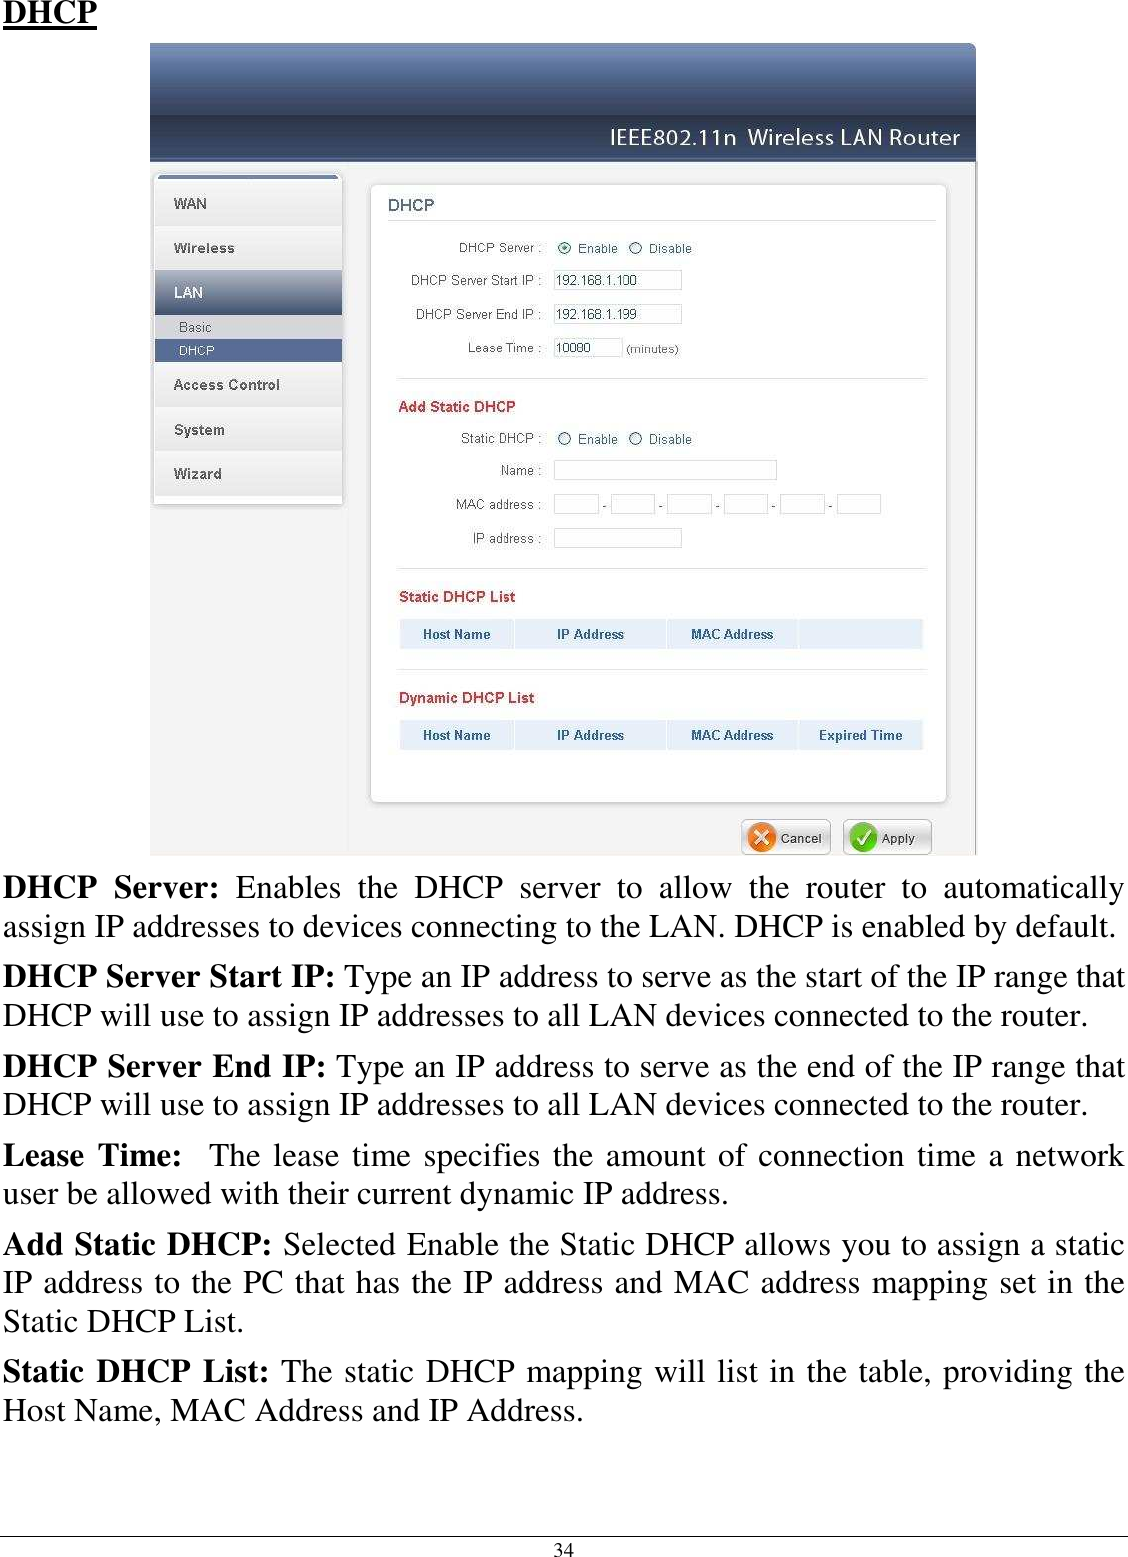 34 DHCP  DHCP  Server:  Enables  the  DHCP  server  to  allow  the  router  to  automatically assign IP addresses to devices connecting to the LAN. DHCP is enabled by default. DHCP Server Start IP: Type an IP address to serve as the start of the IP range that DHCP will use to assign IP addresses to all LAN devices connected to the router. DHCP Server End IP: Type an IP address to serve as the end of the IP range that DHCP will use to assign IP addresses to all LAN devices connected to the router. Lease Time:  The lease time specifies the amount of connection time a network user be allowed with their current dynamic IP address. Add Static DHCP: Selected Enable the Static DHCP allows you to assign a static IP address to the PC that has the IP address and MAC address mapping set in the Static DHCP List. Static DHCP List: The static DHCP mapping will list in the table, providing the Host Name, MAC Address and IP Address.  